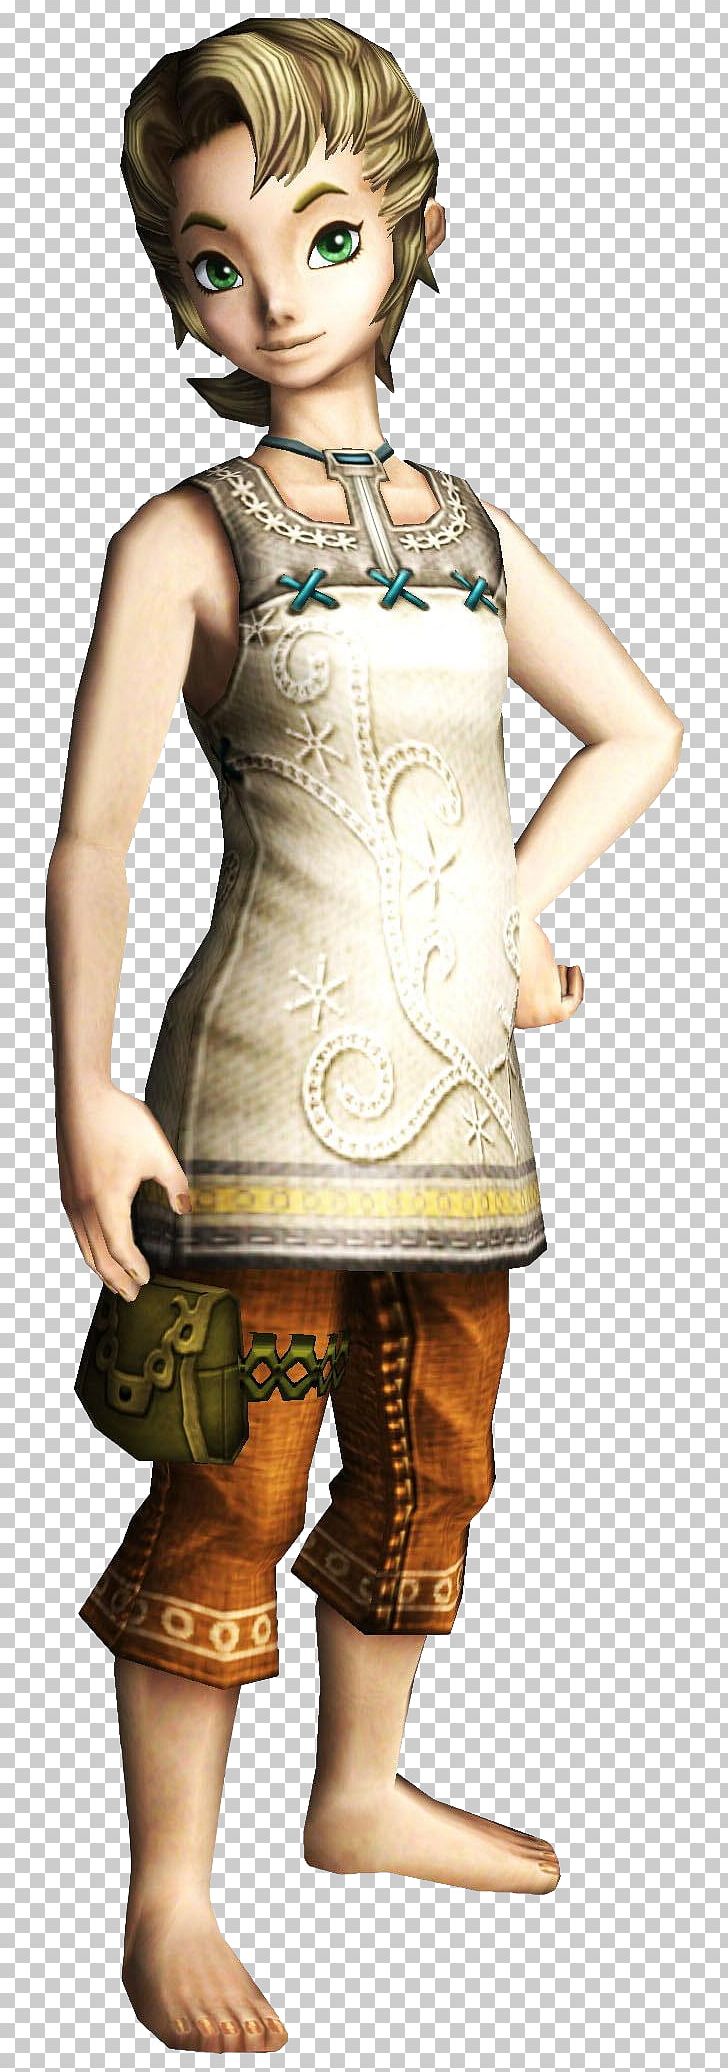 The Legend Of Zelda: Twilight Princess HD Princess Zelda Link The Legend Of Zelda: Breath Of The Wild Hyrule Warriors PNG, Clipart, Doll, Hyrule Warriors, Joint, Legend Of Zelda, Legend Of Zelda Breath Of The Wild Free PNG Download